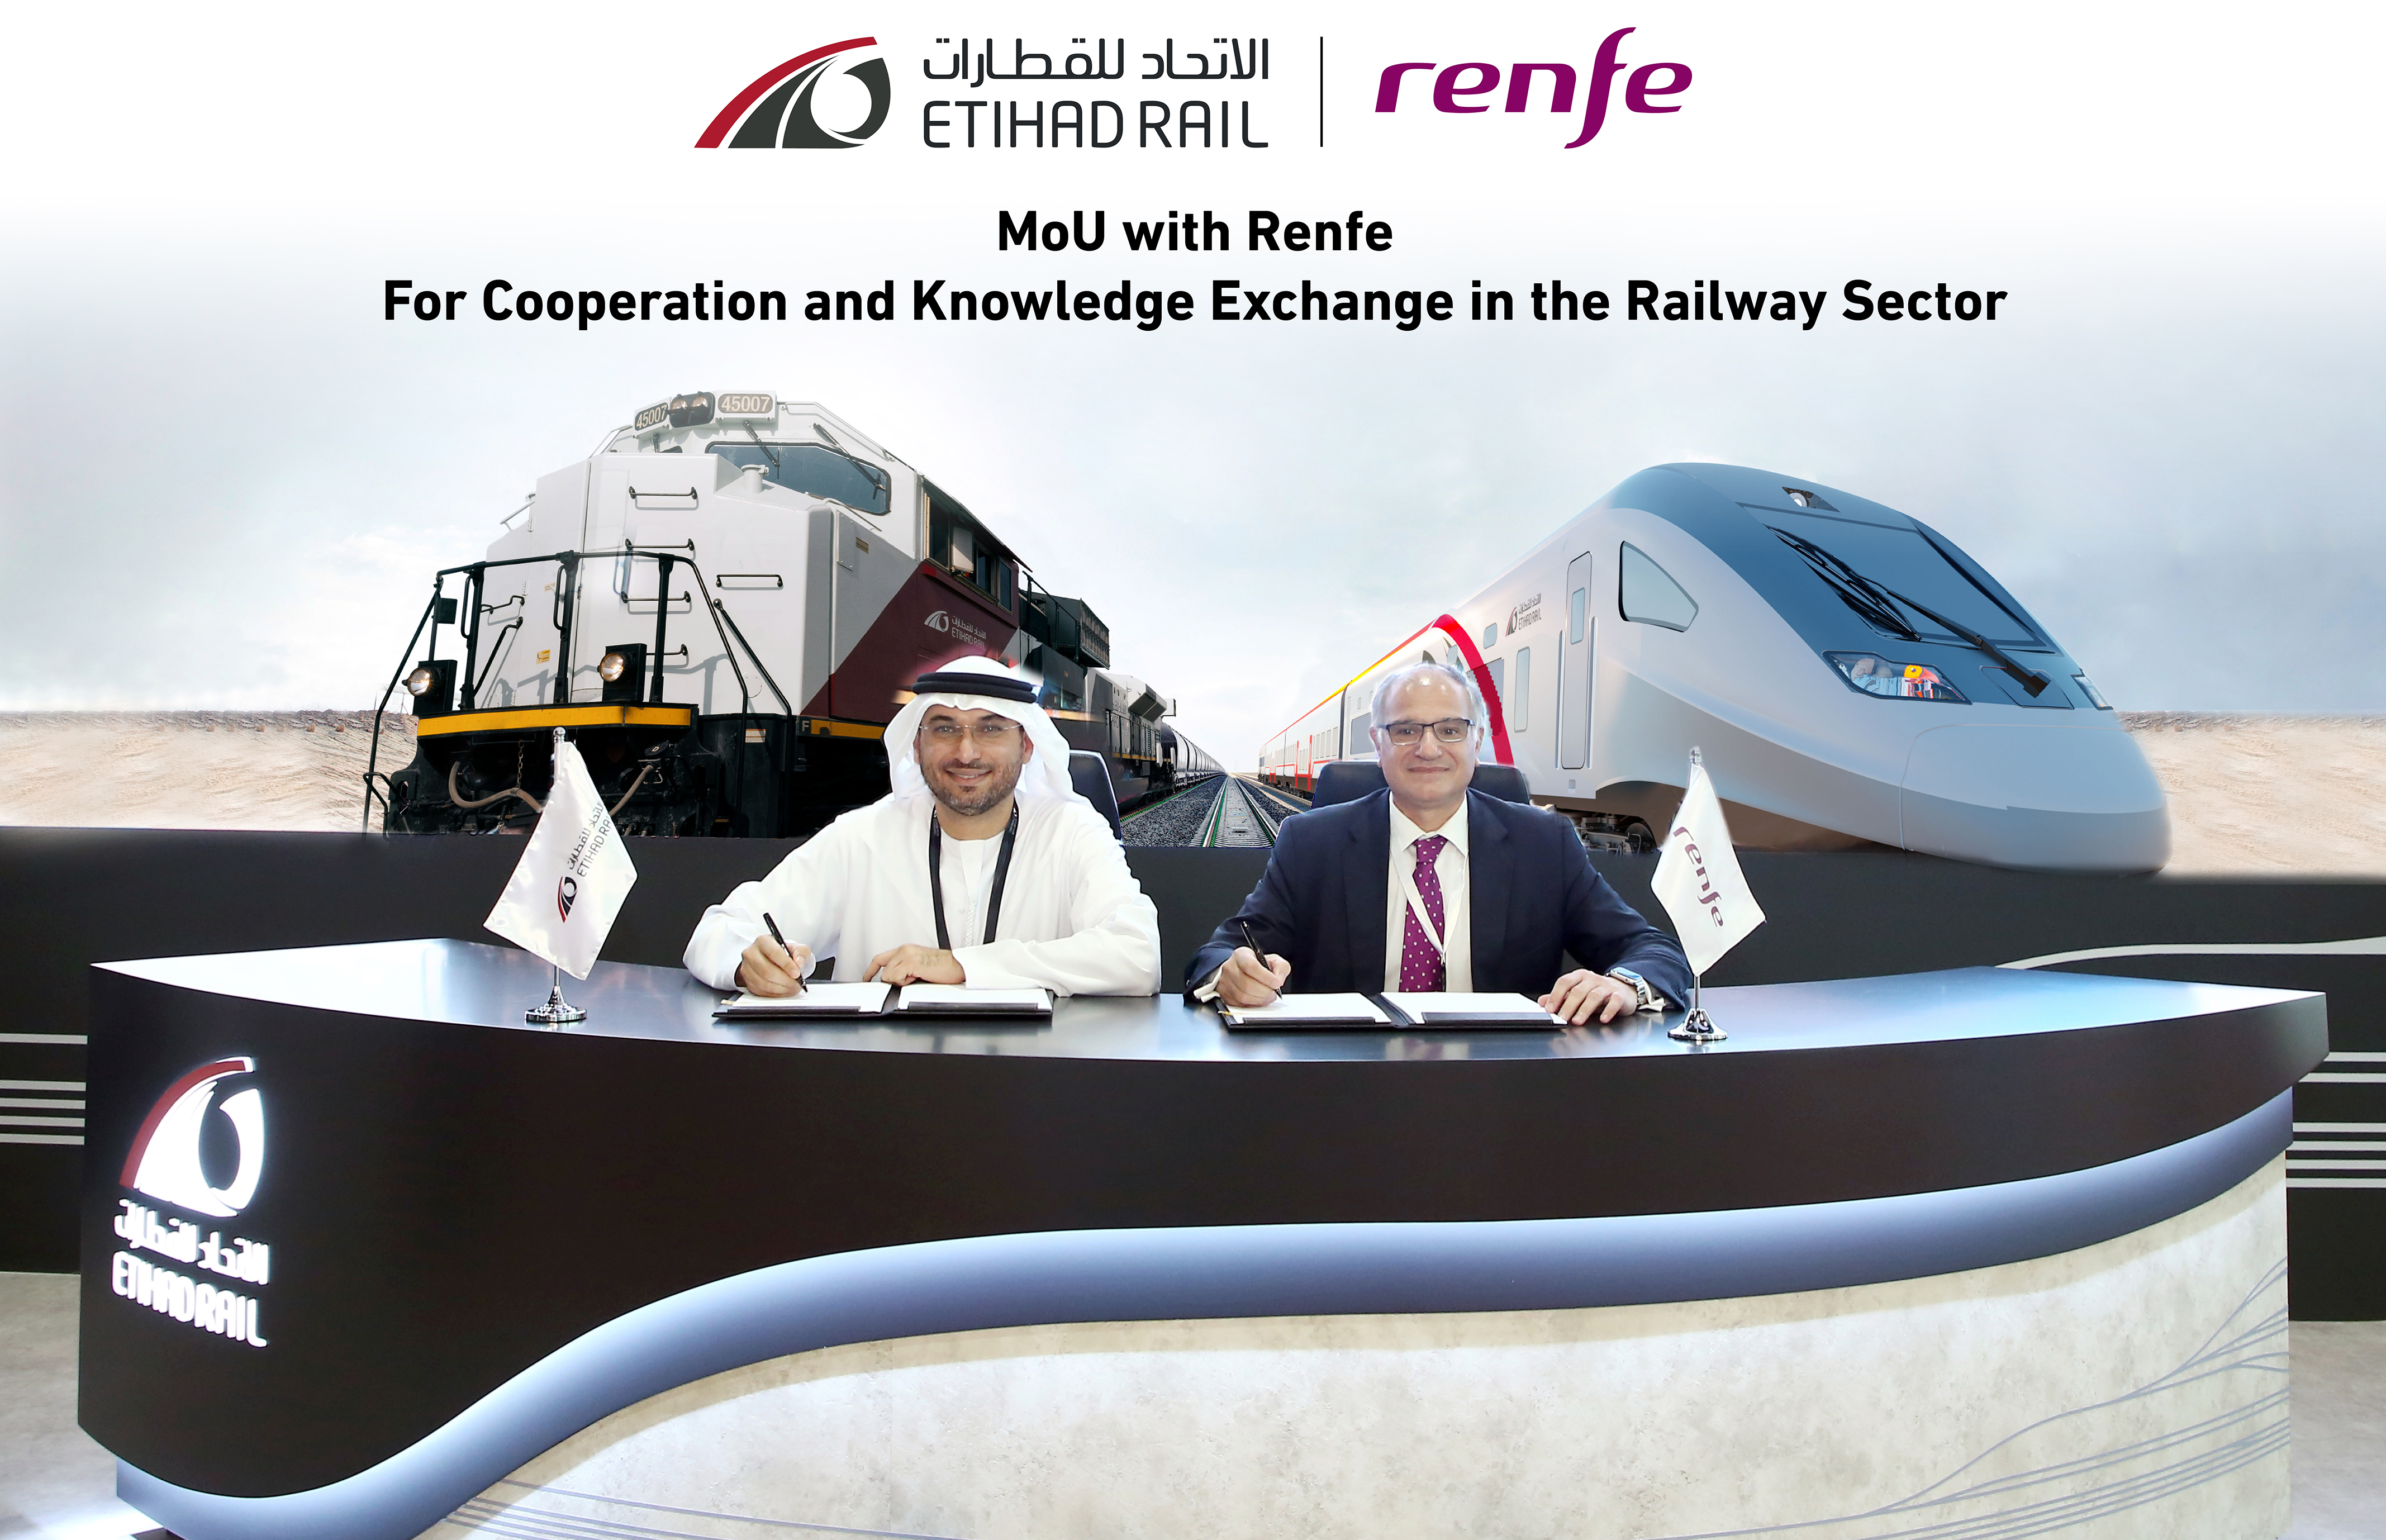 Etihad Rail Signs Three MoUs With European Companies To Exchange Knowledge And Expertise In The Railway Sector